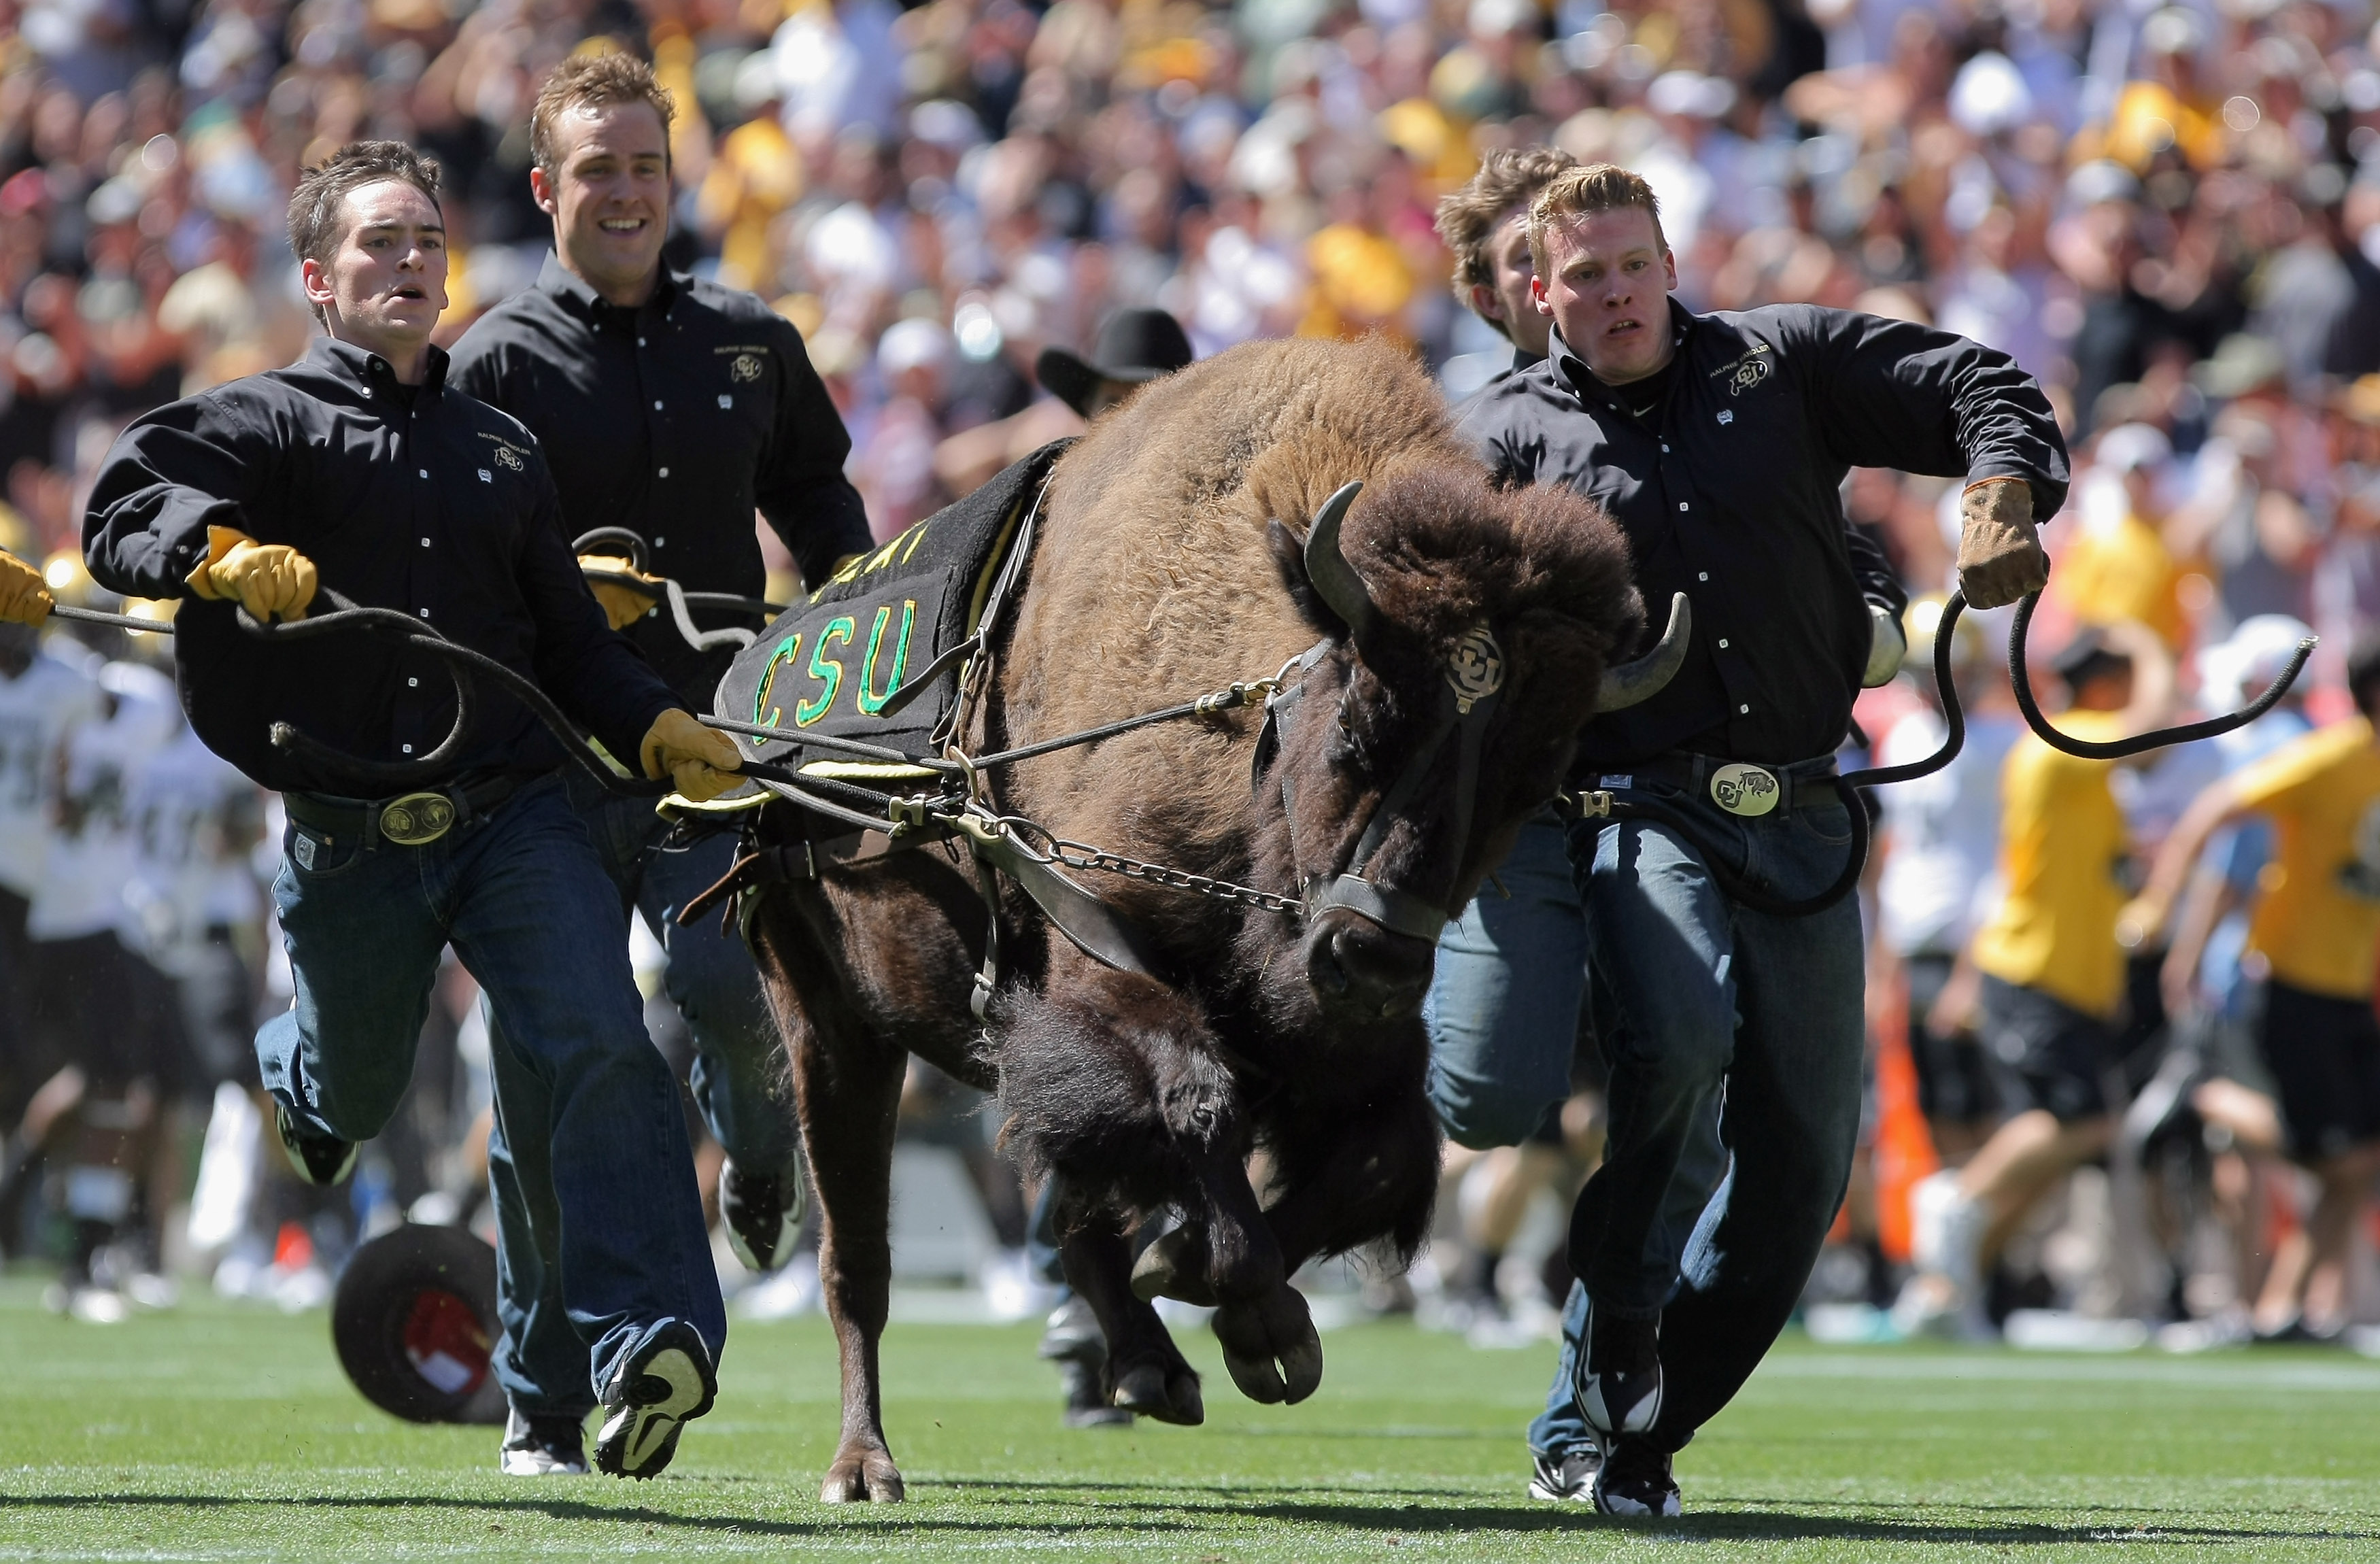 DENVER - SEPTEMBER 04:  Ralphies Runners flank Ralphie V as he escorts the Colorado Buffaloes onto the field to face the Colorado State Rams during the the Rocky Mountain Showdown at INVESCO Field at Mile High on September 4, 2010 in Denver, Colorado.  (P